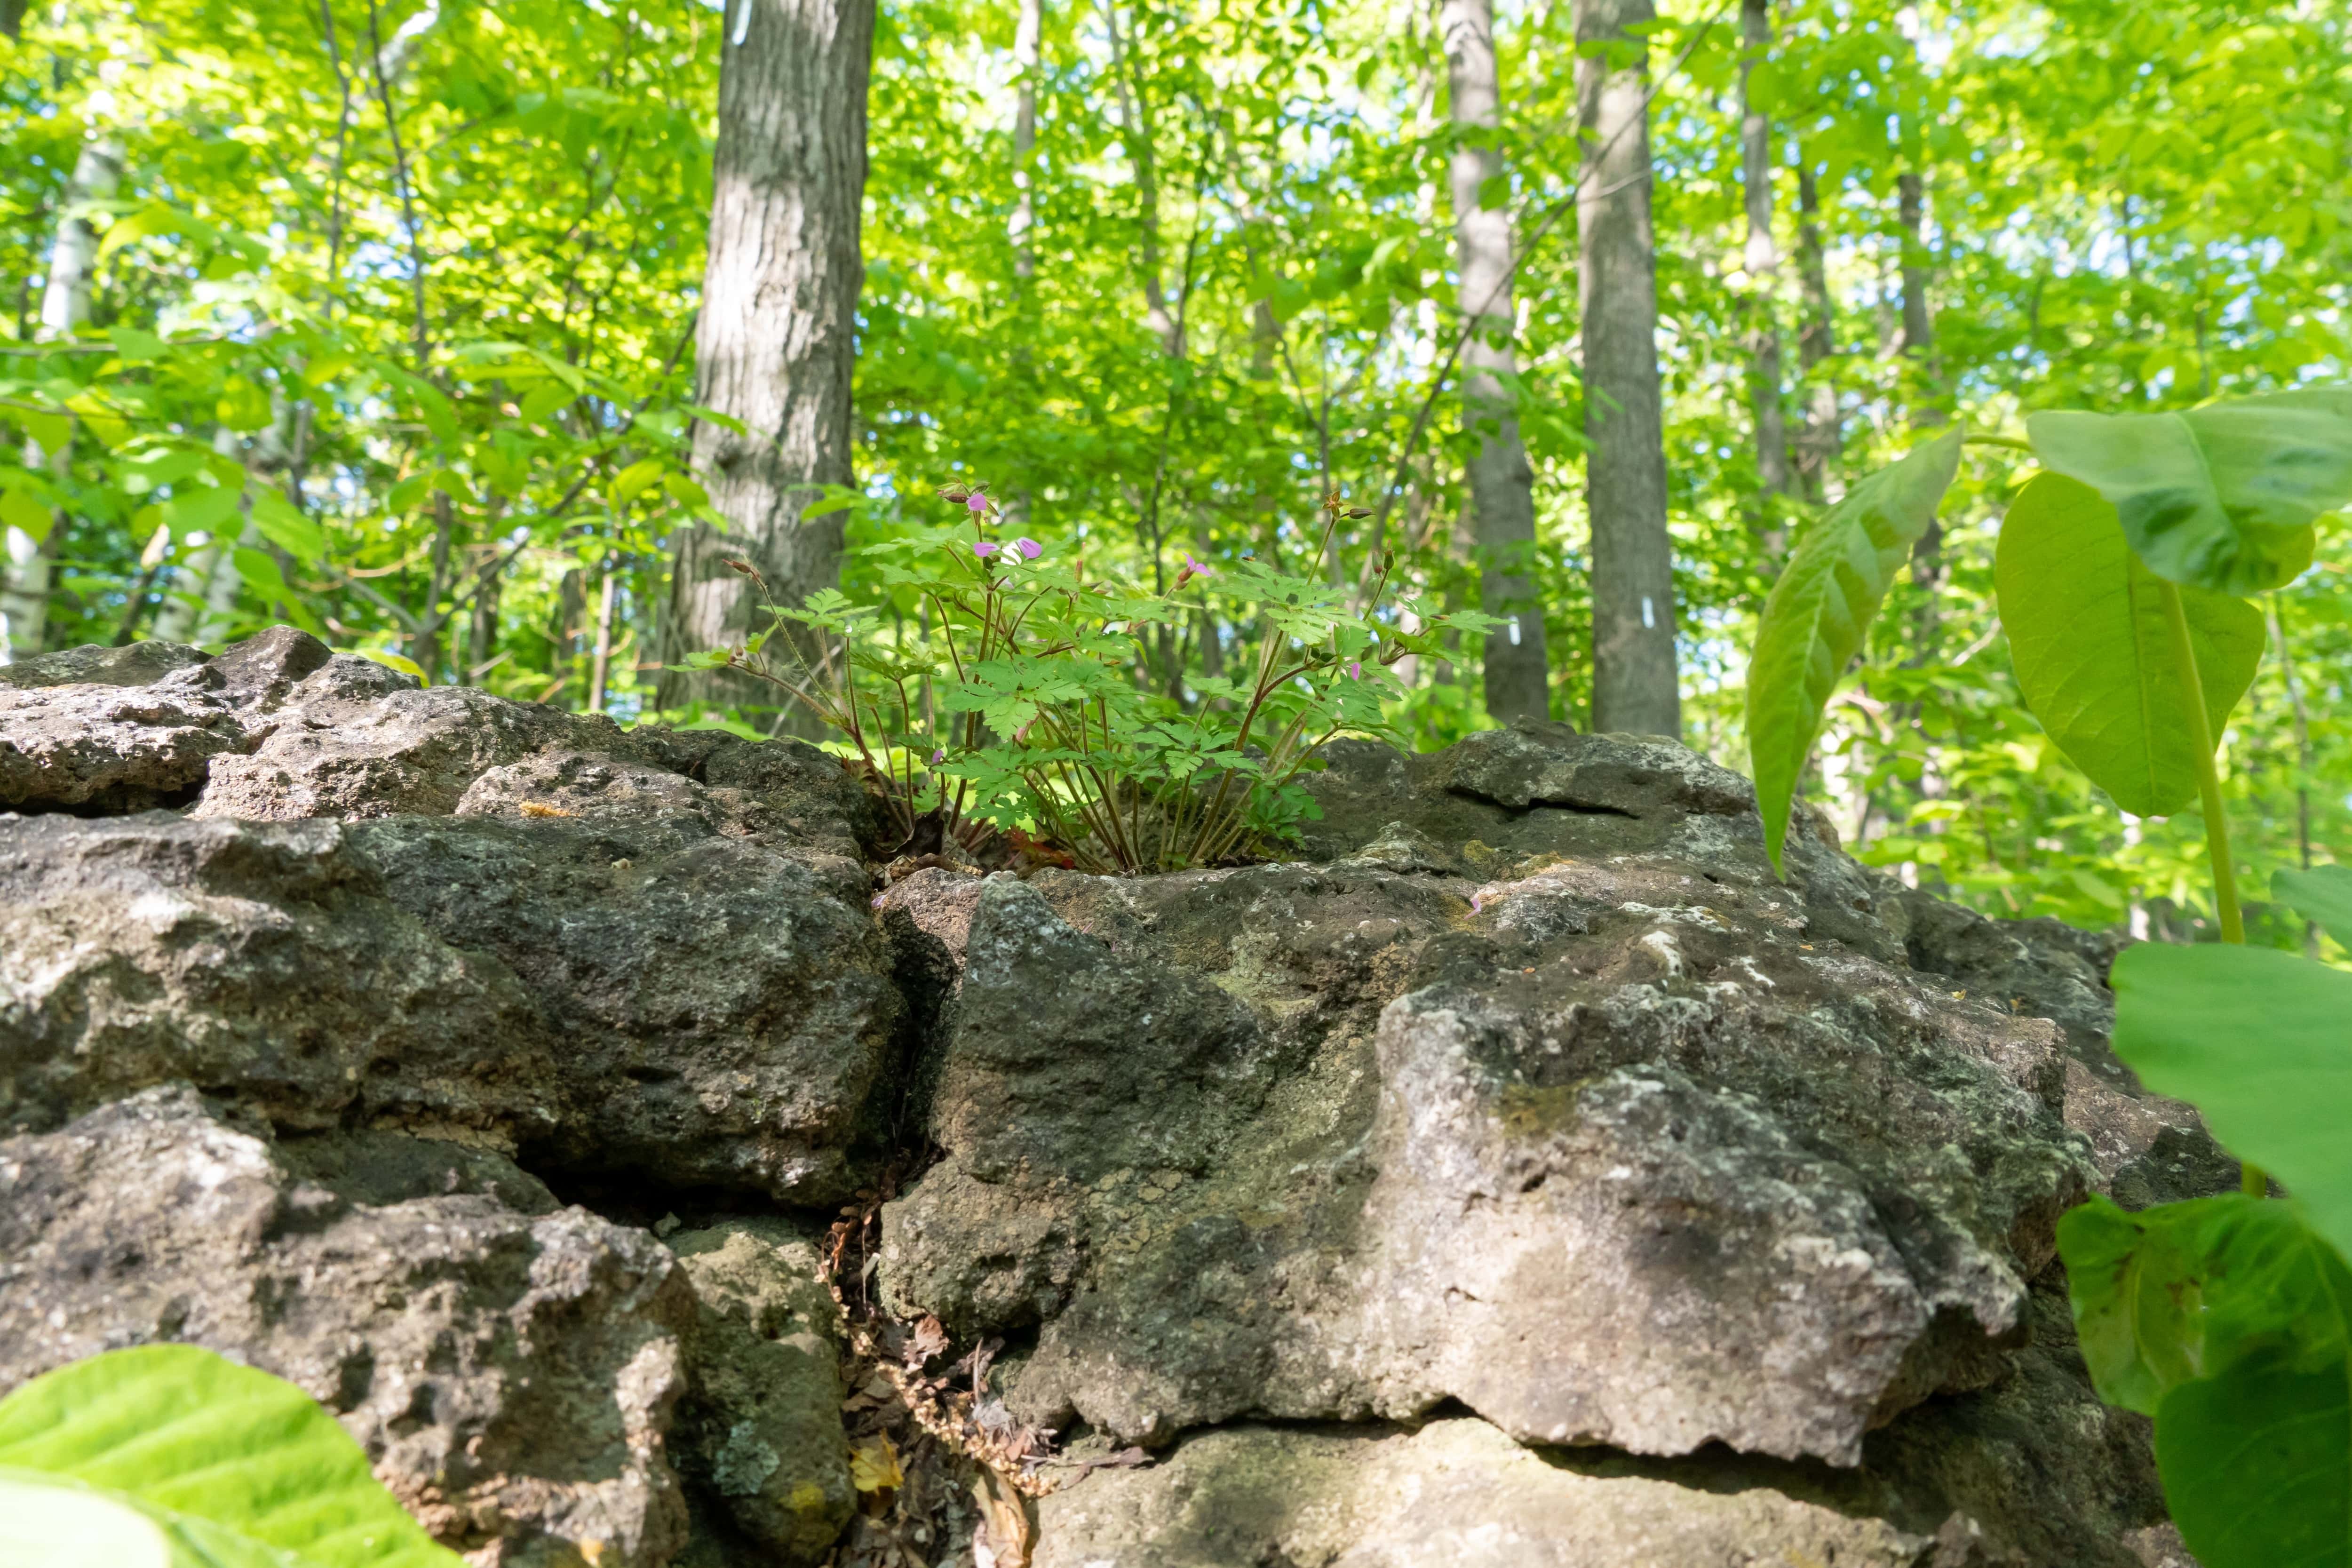 Plants and trees grow out of a rocky outcropping